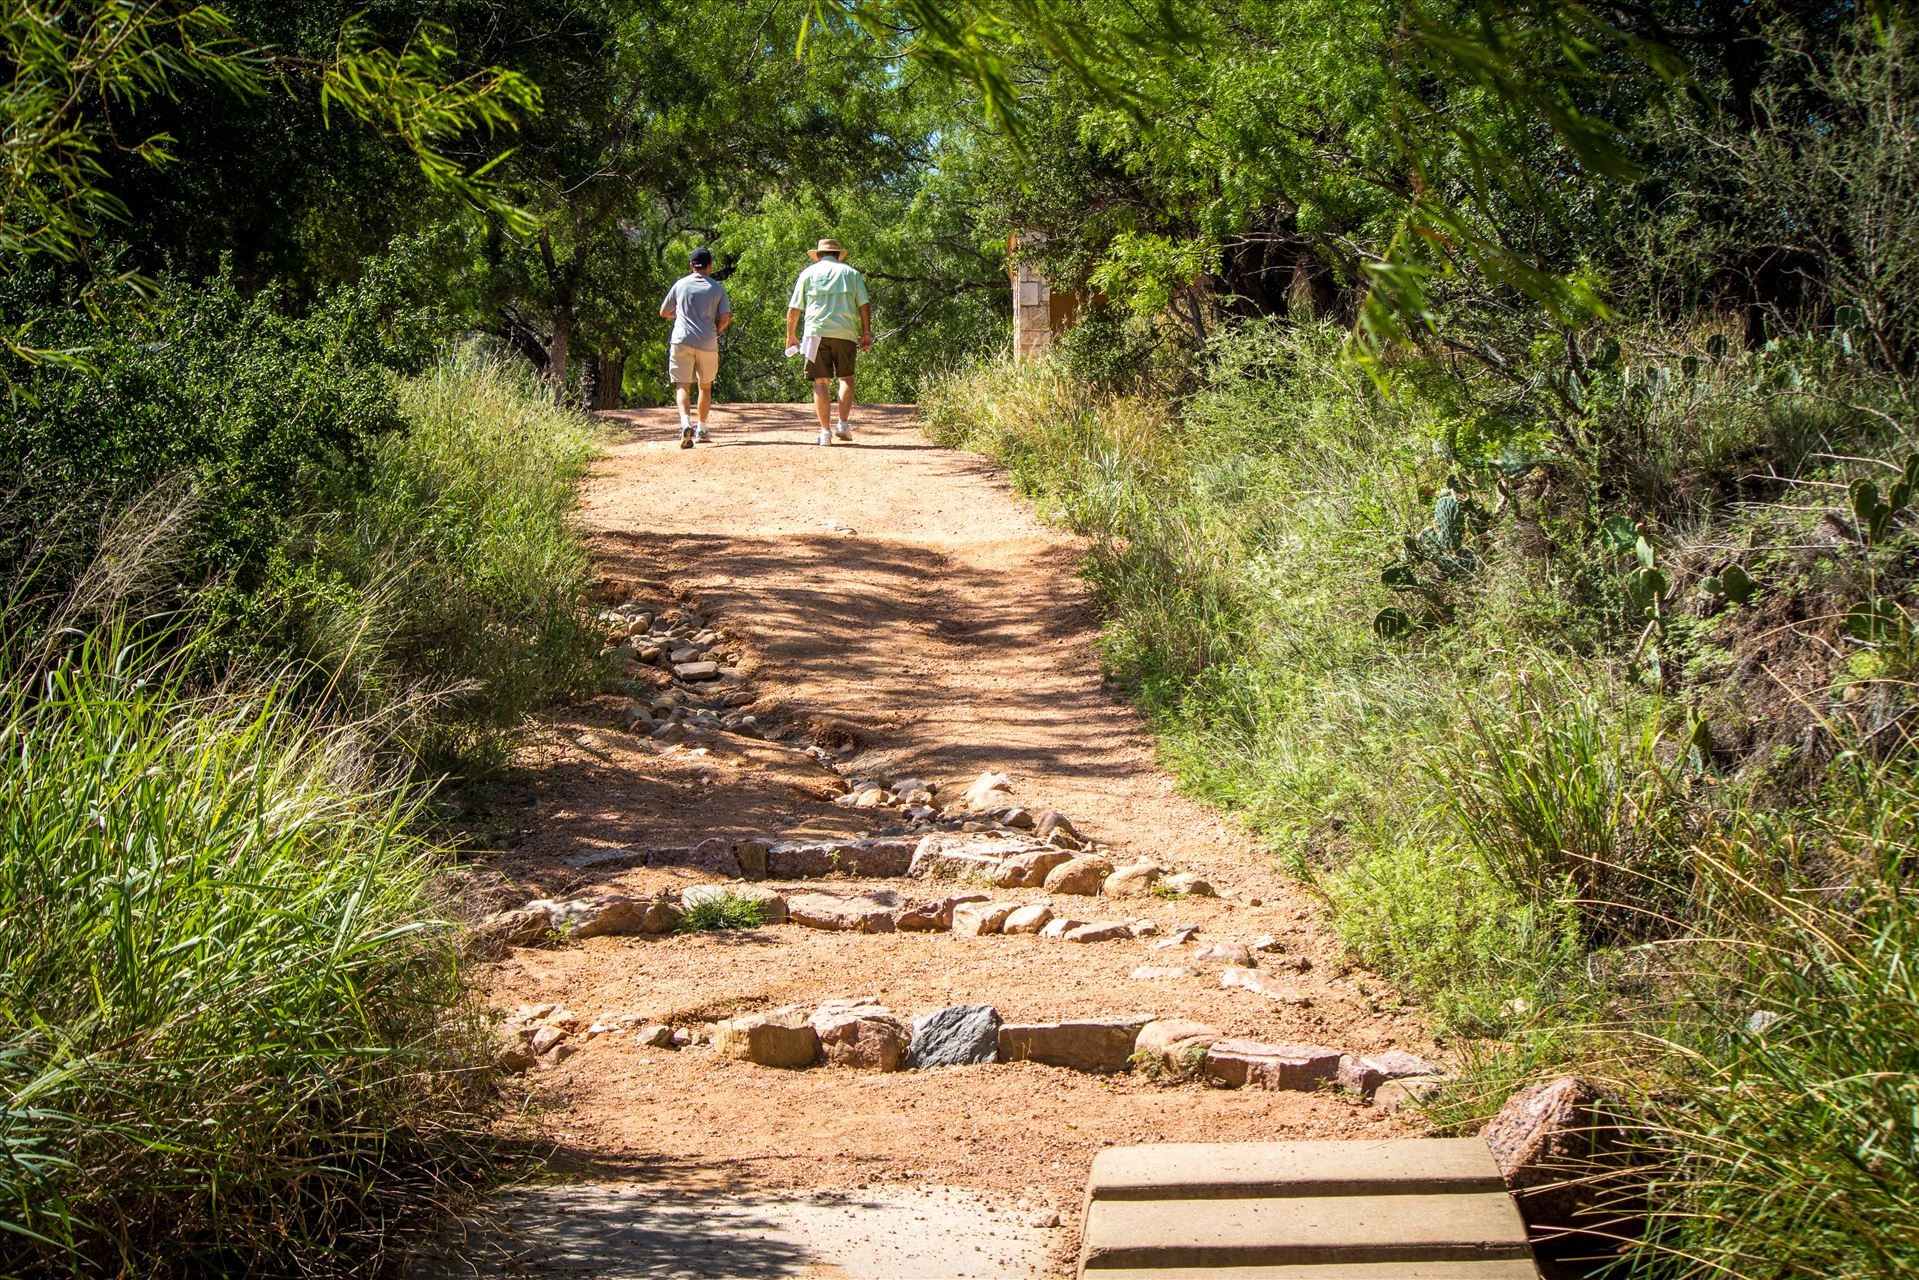 20130723-Enchanted Rock-DSLR-004.jpg -  by Charles Smith Photography